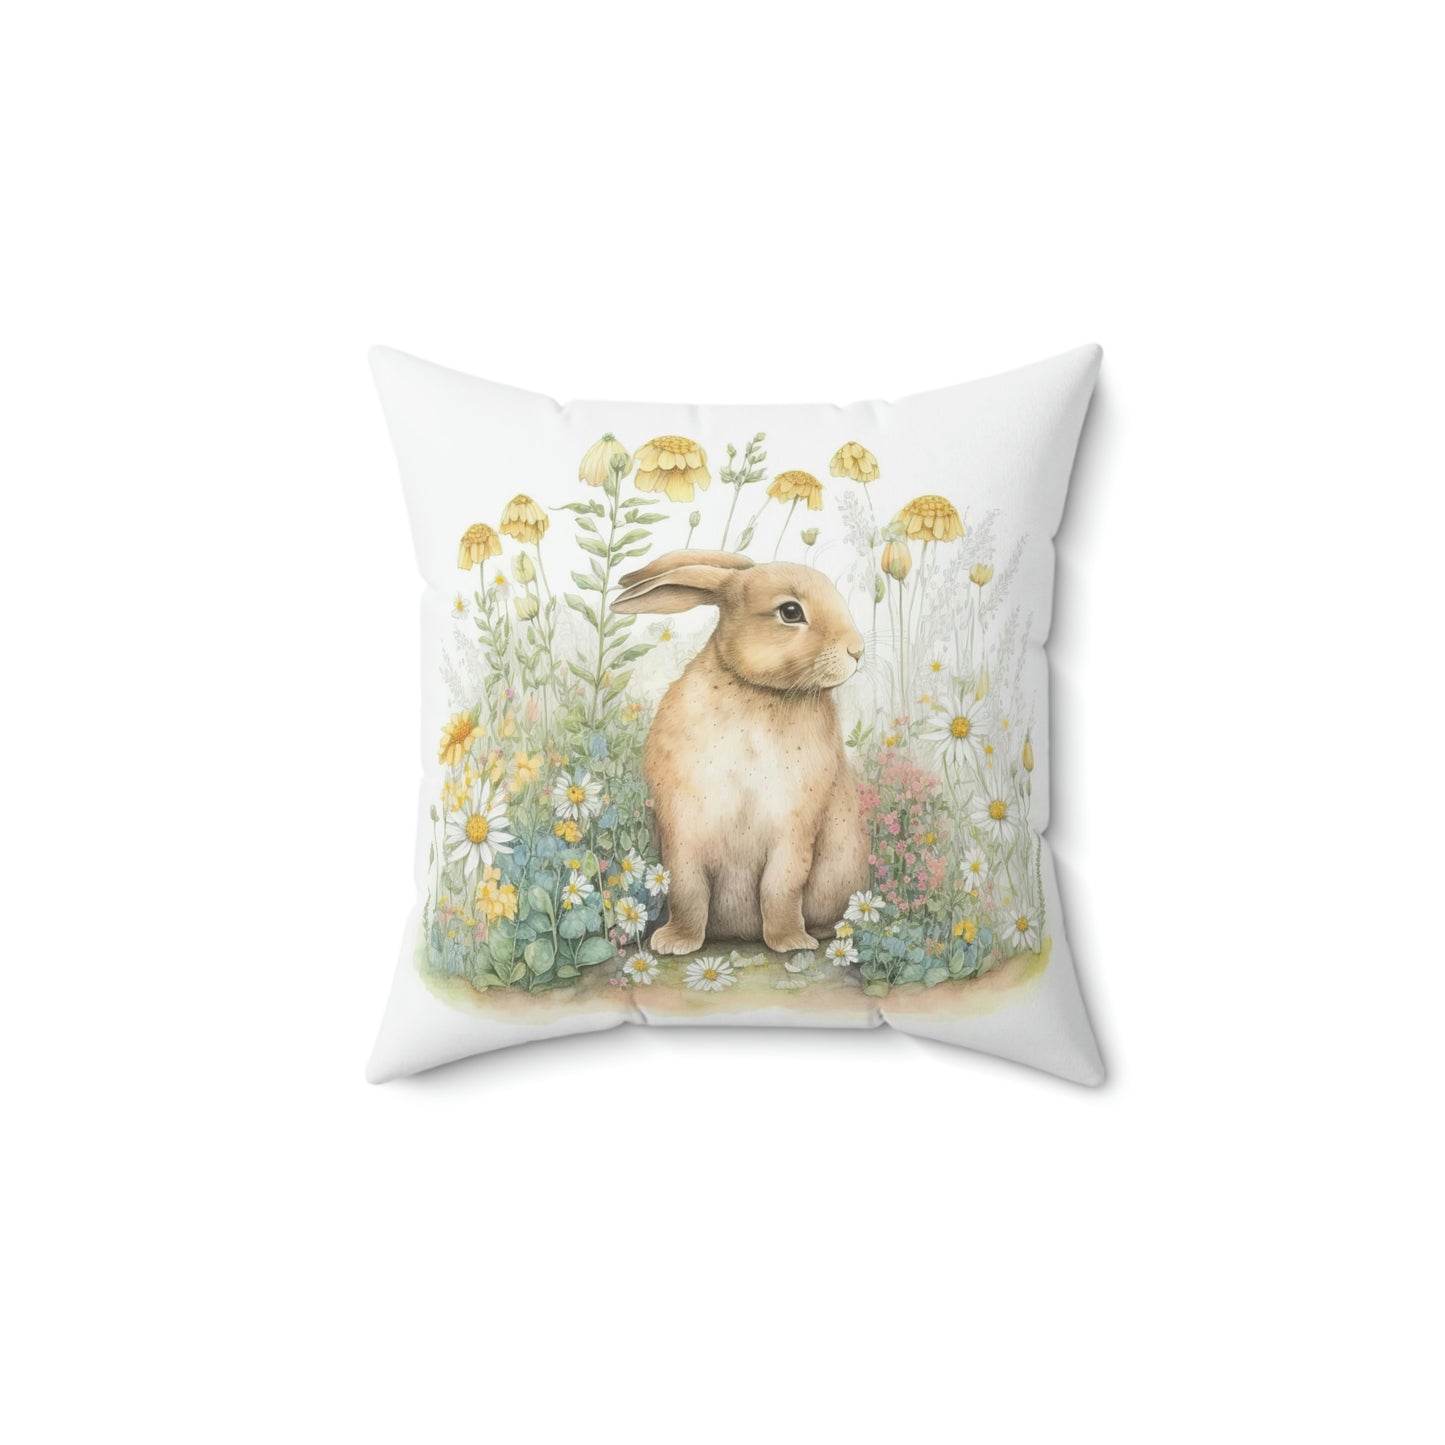 bunny accent throw pillow sitting on a grey living room couch, decorate your room for spring with this floral bunny pattern throw pillow, square pillow with a bunny pattern